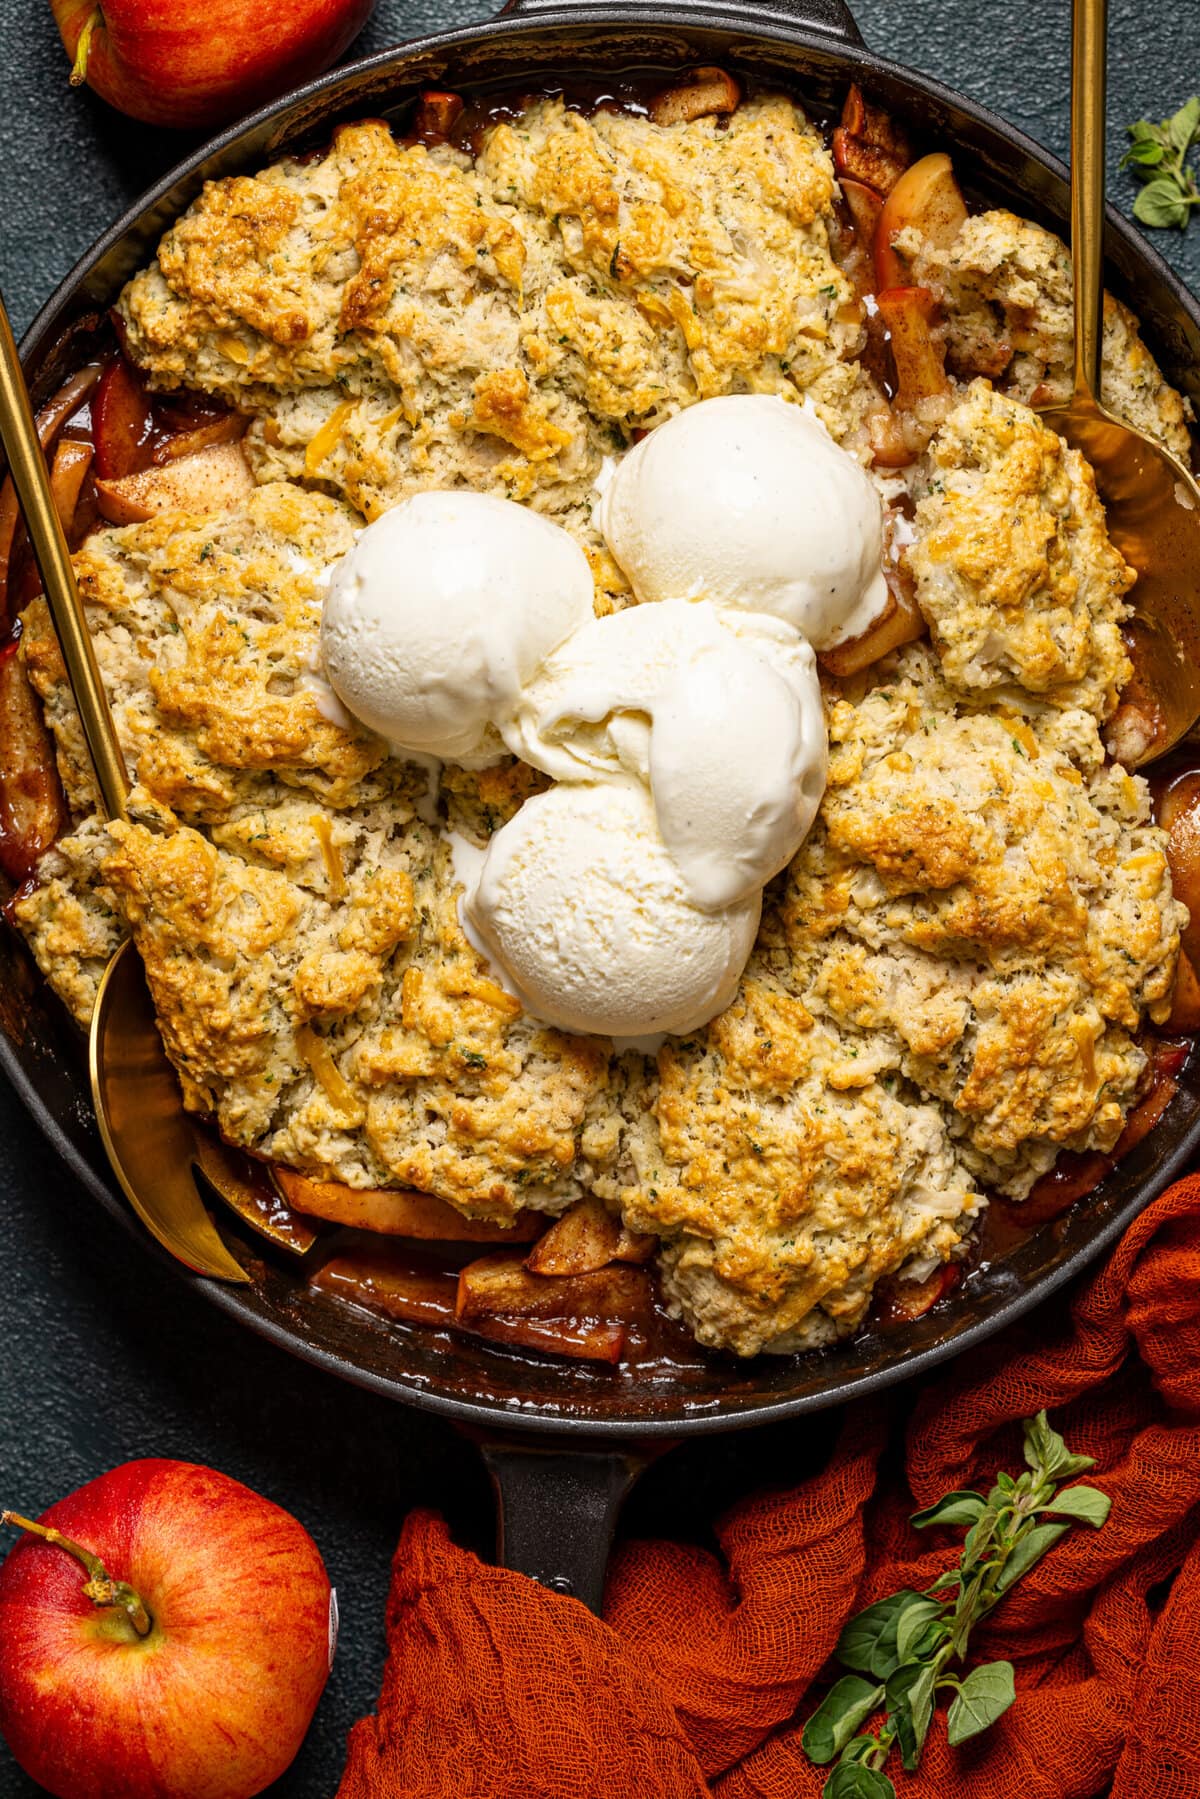 Up close shot of baked cobbler with scoops of ice cream and serving spoons.